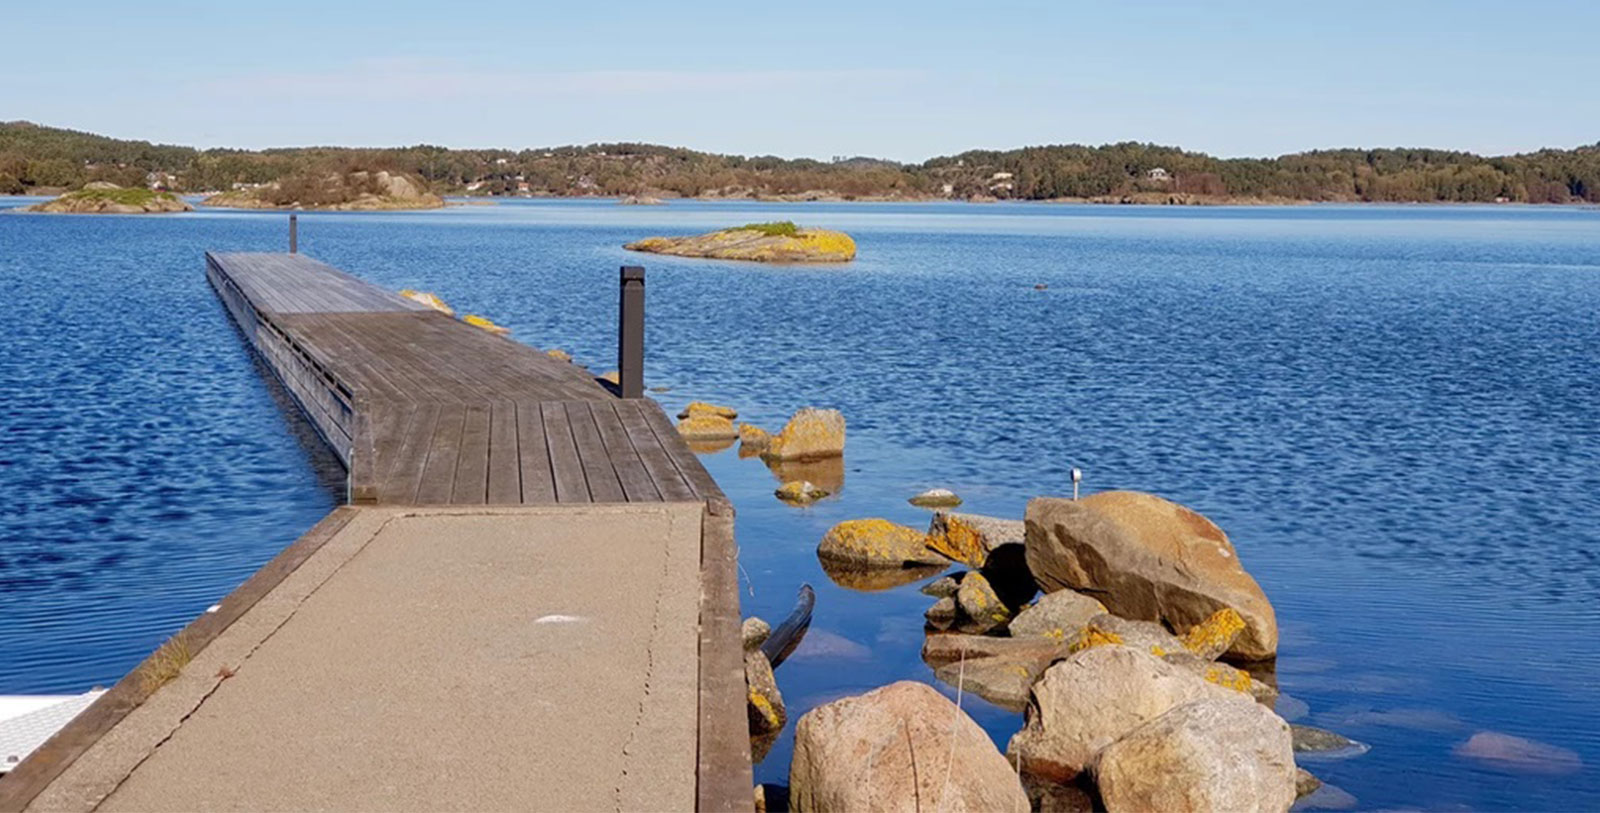 Explore the skerries, rocks and fields around Engø Gård on a scenic bike ride.